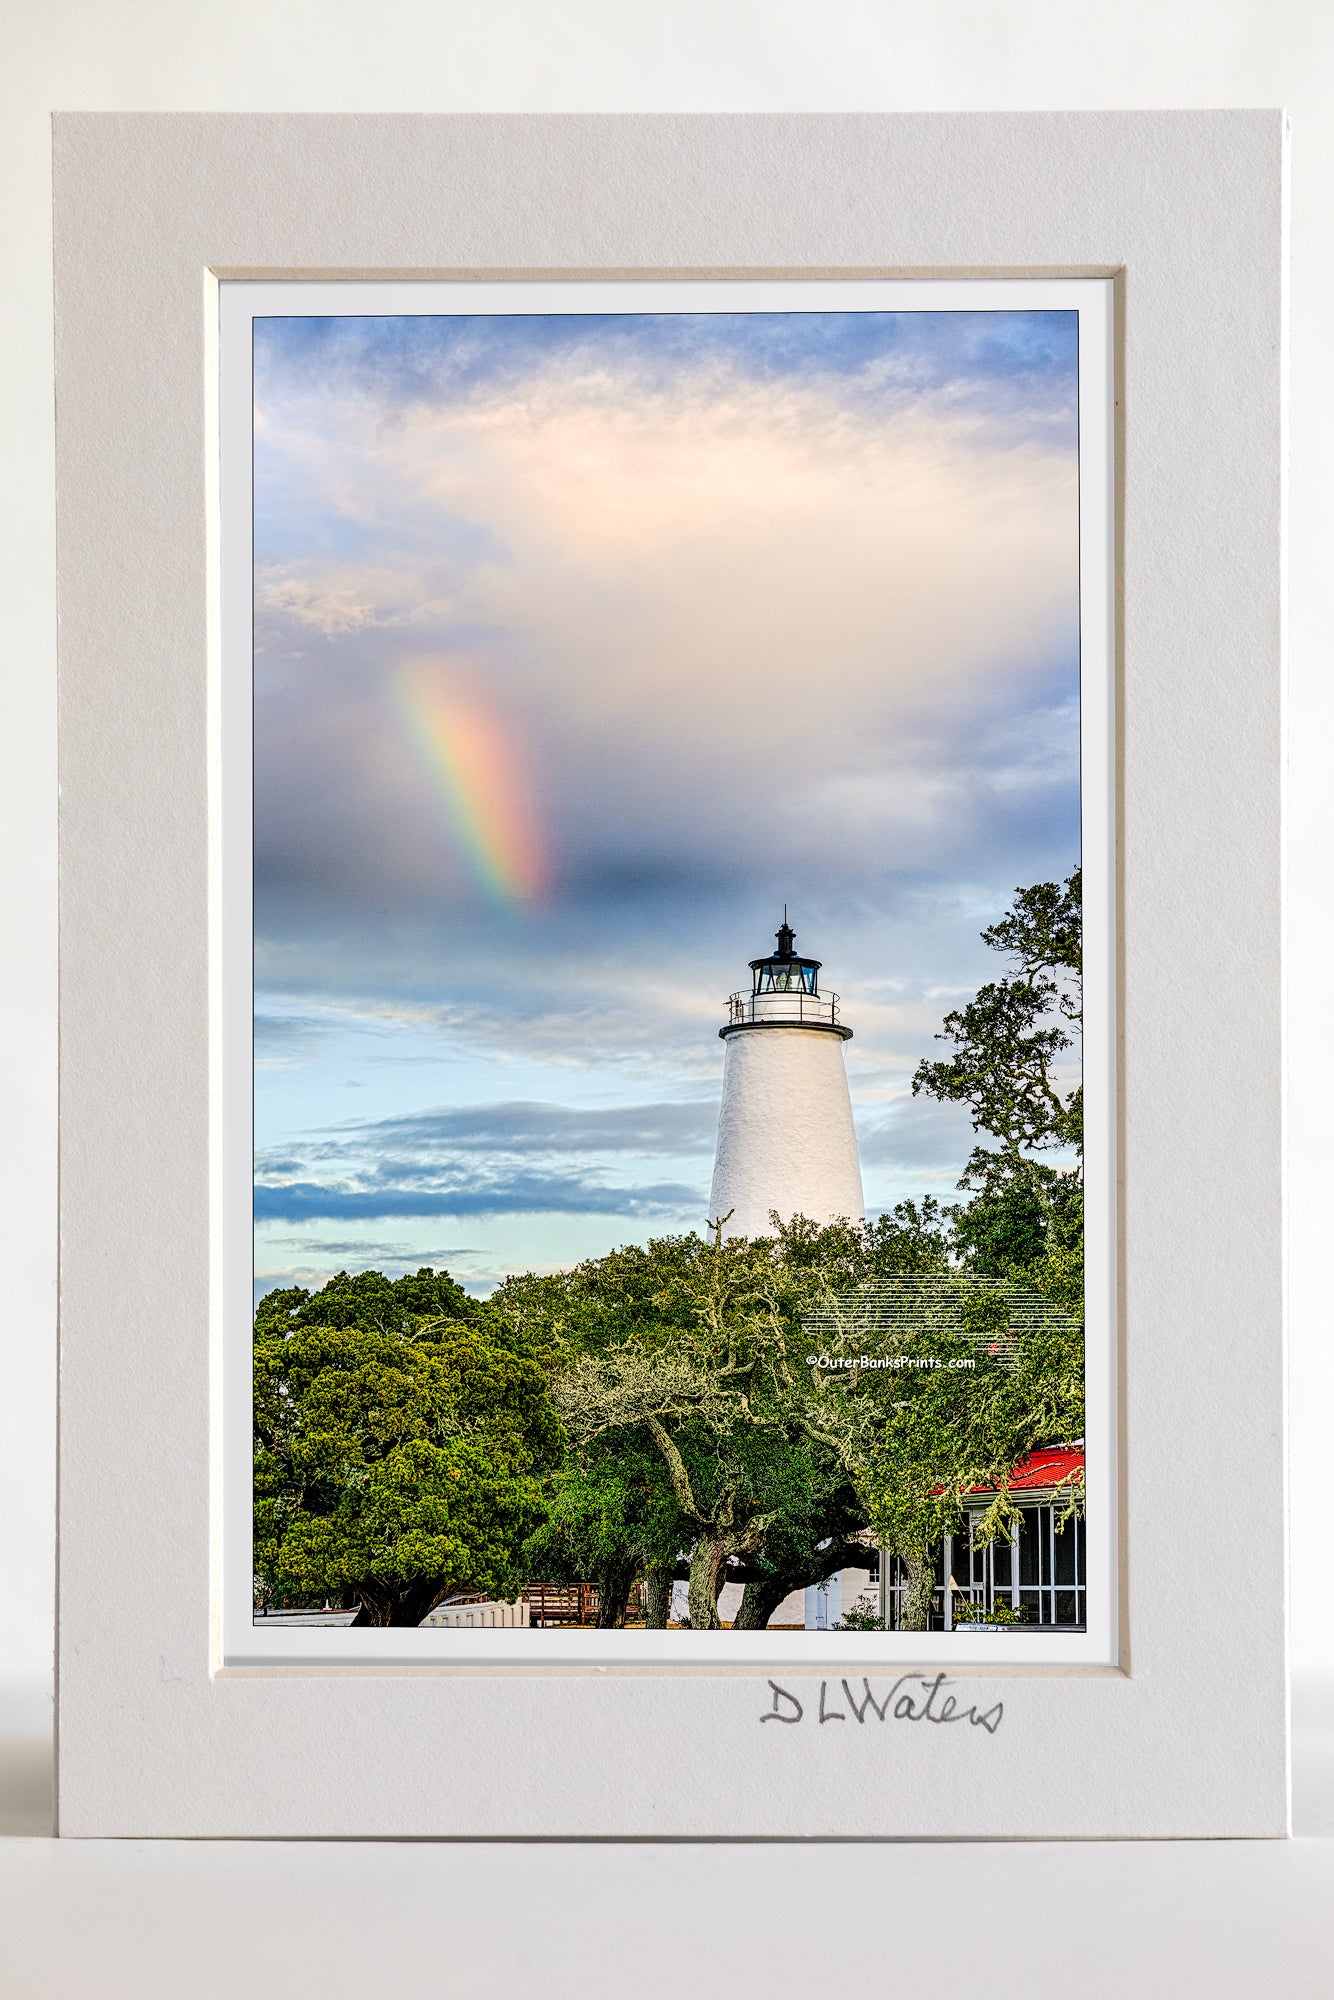 4 x 6 luster print in a 5 x 7 ivory mat of Ocracoke Lighthouse and a rainbow as the morning storm clears.